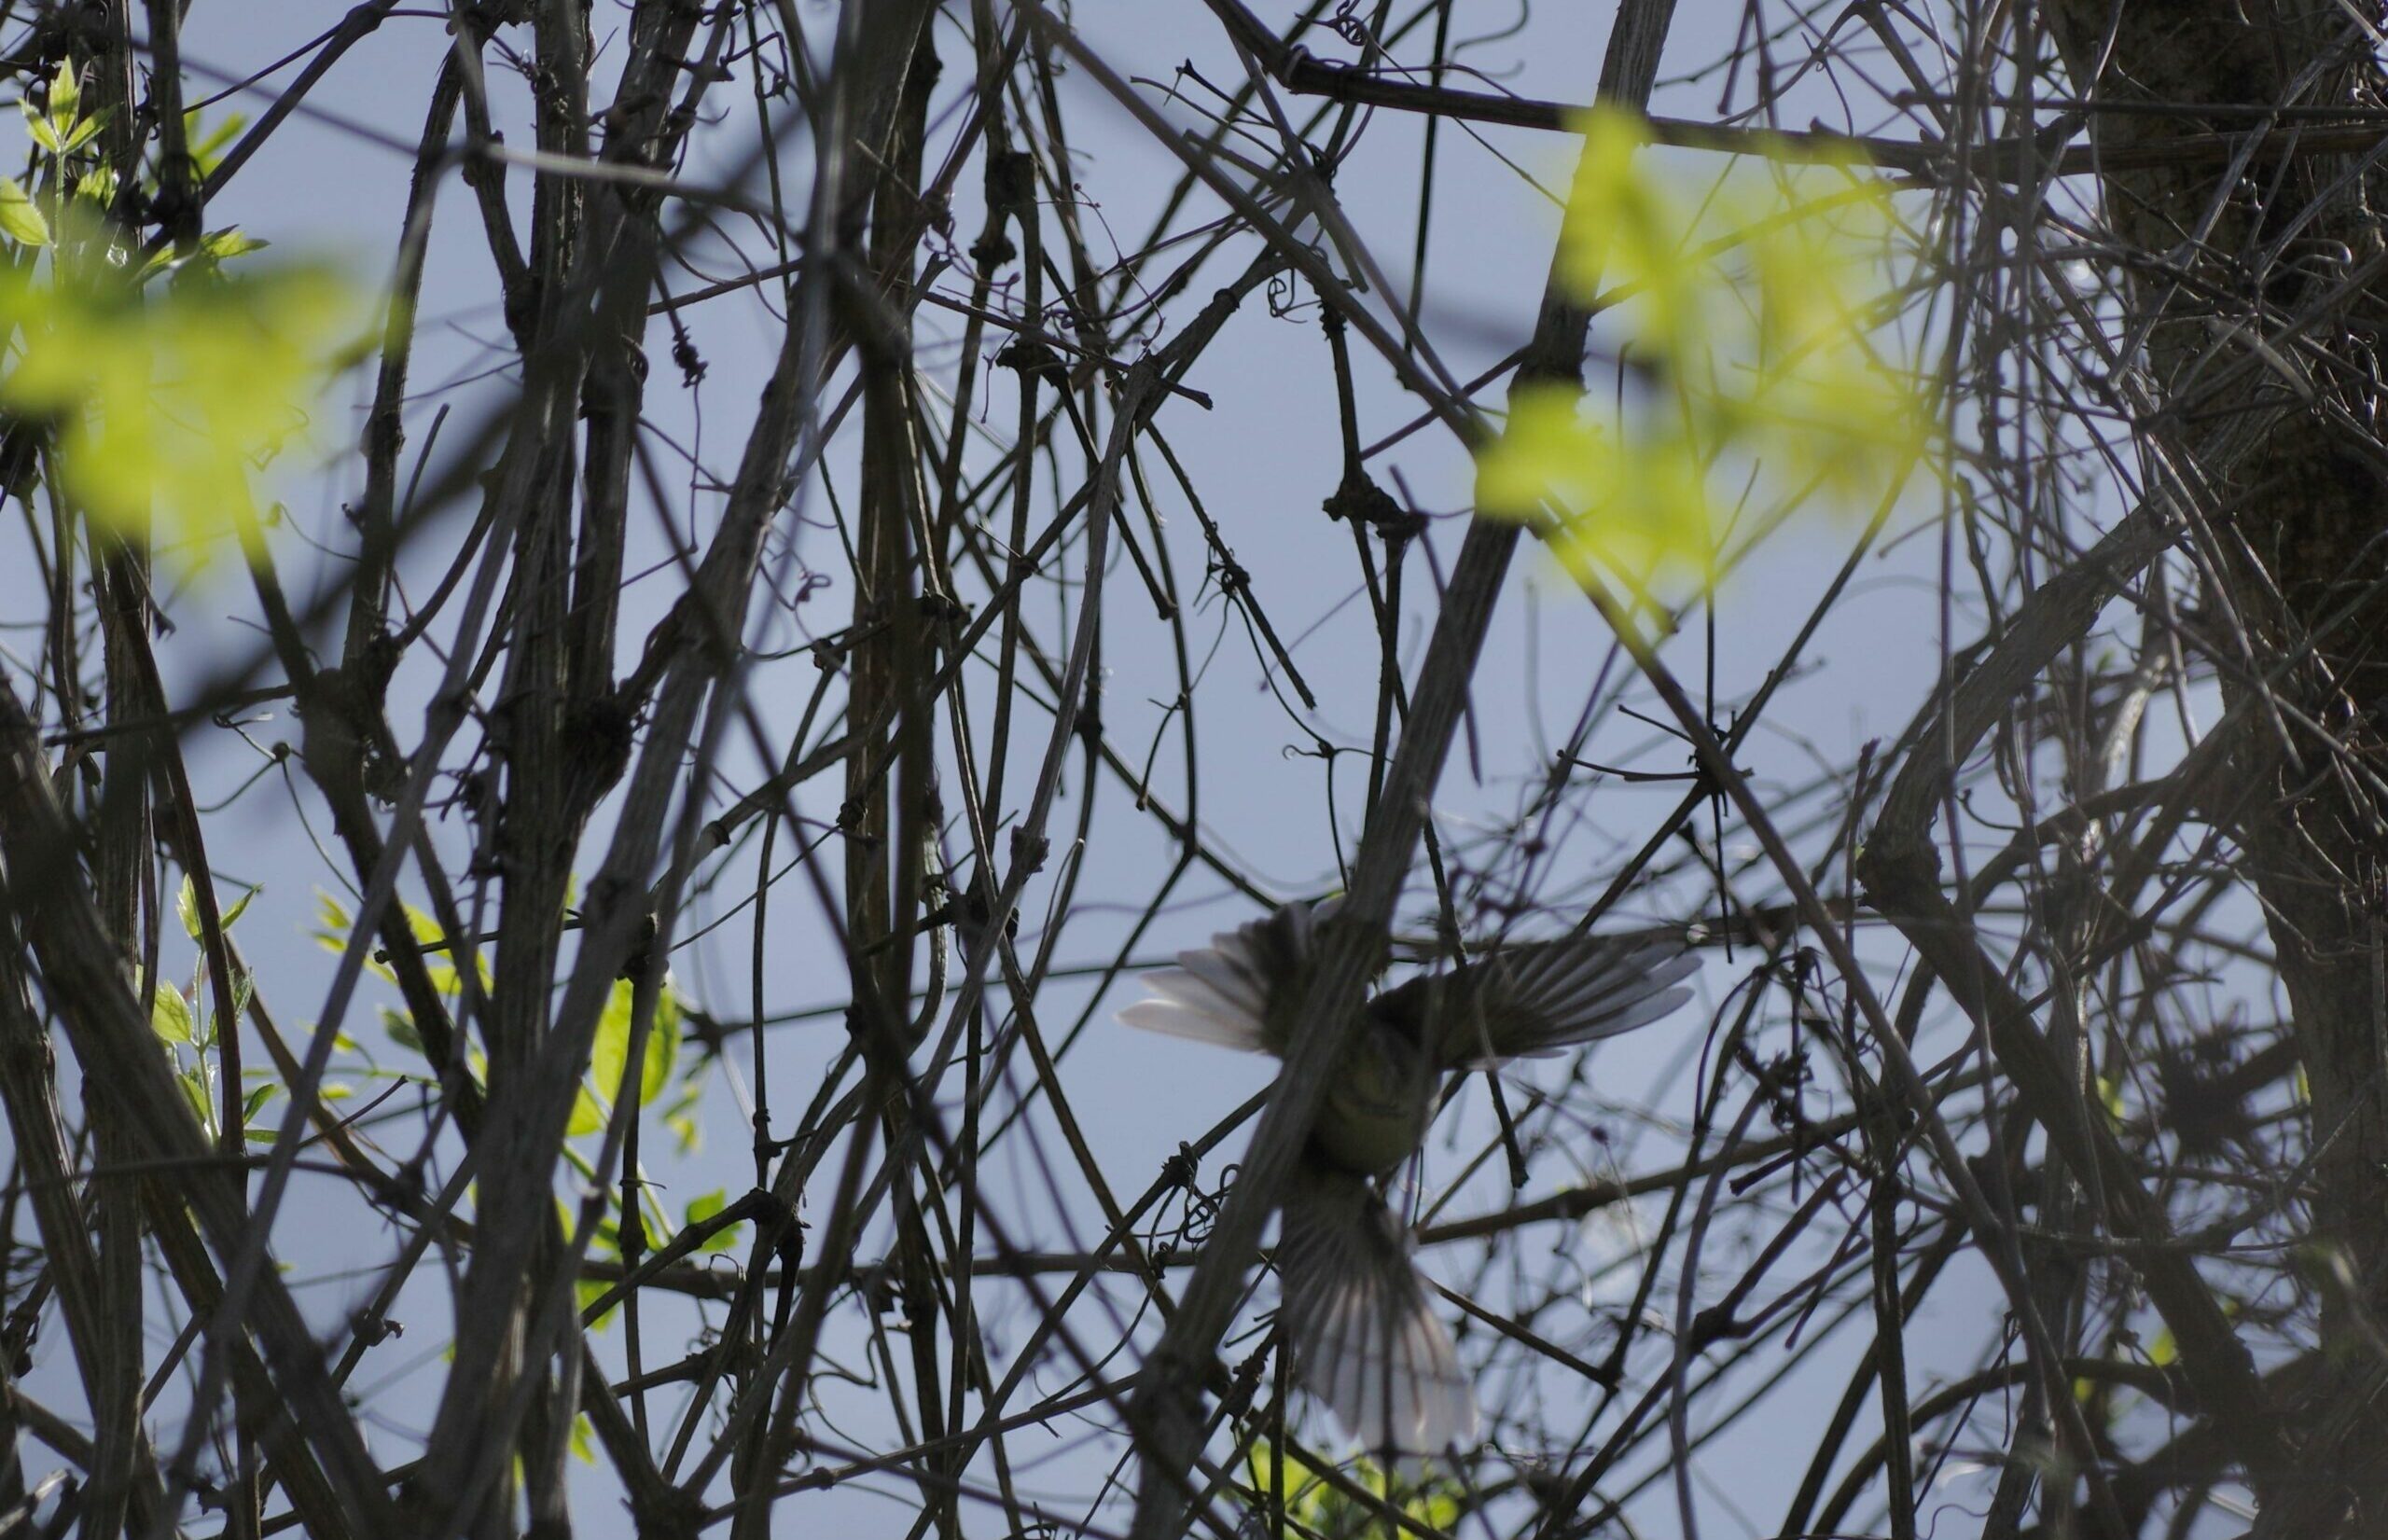 Bird in flight, full wings open, in branches with a few new tender green leaves